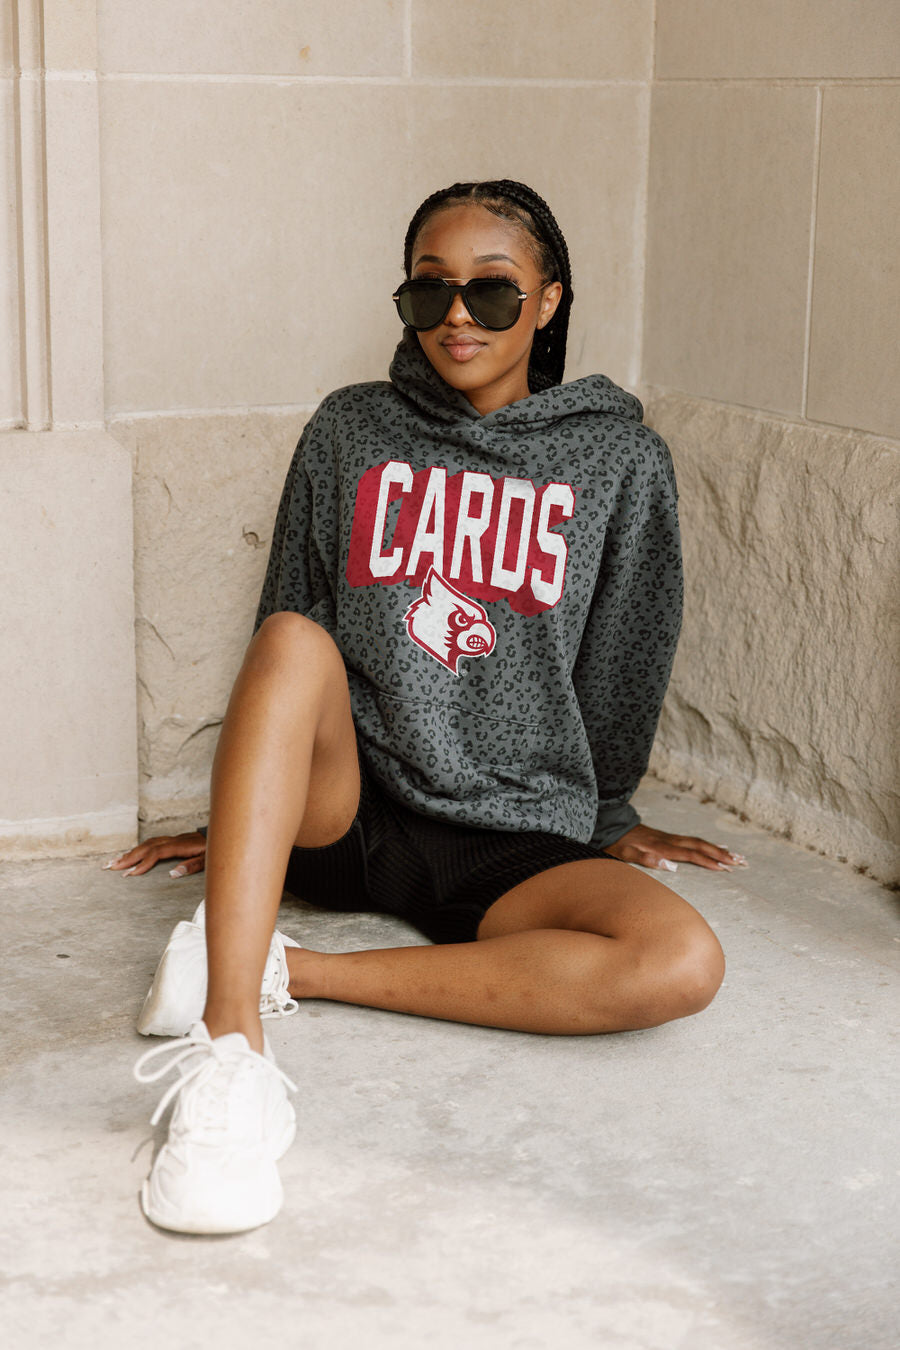 LOUISVILLE CARDINALS UP YOUR GAME OVERSIZED CREWNECK TEE BY MADI PREWETT  TROUTT